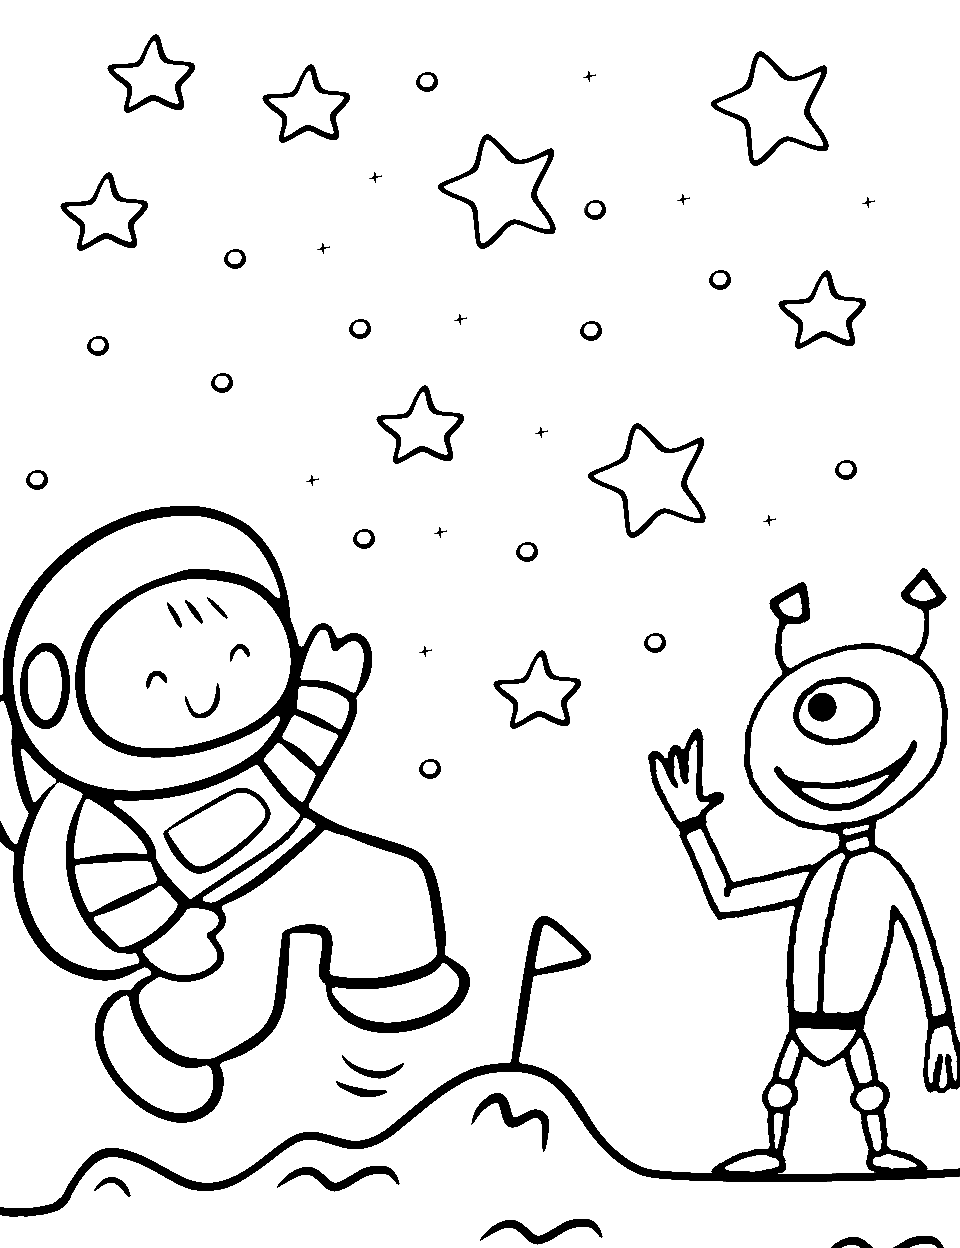 Friendly Alien Encounter Coloring Page - An astronaut and a friendly alien mimicking the astronaut and standing together.